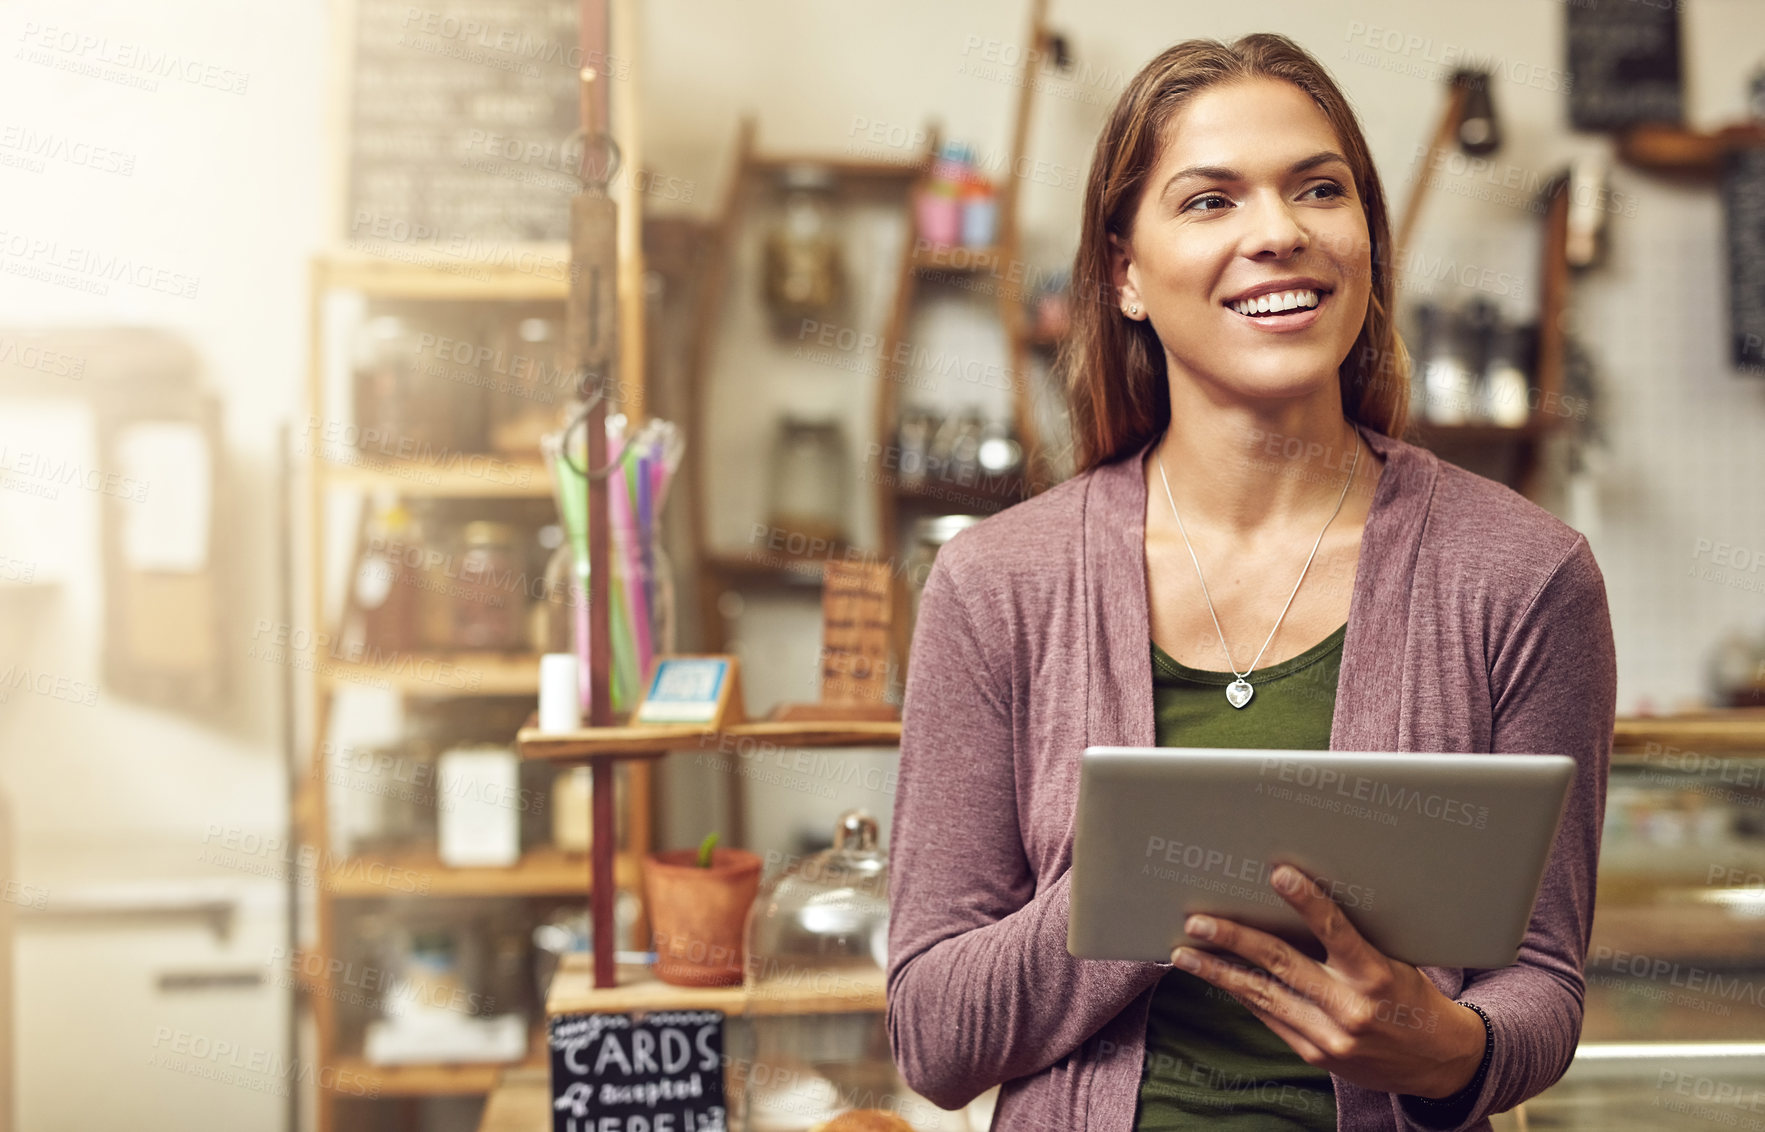 Buy stock photo Shot of a young entrepreneur using a digital tablet in her store